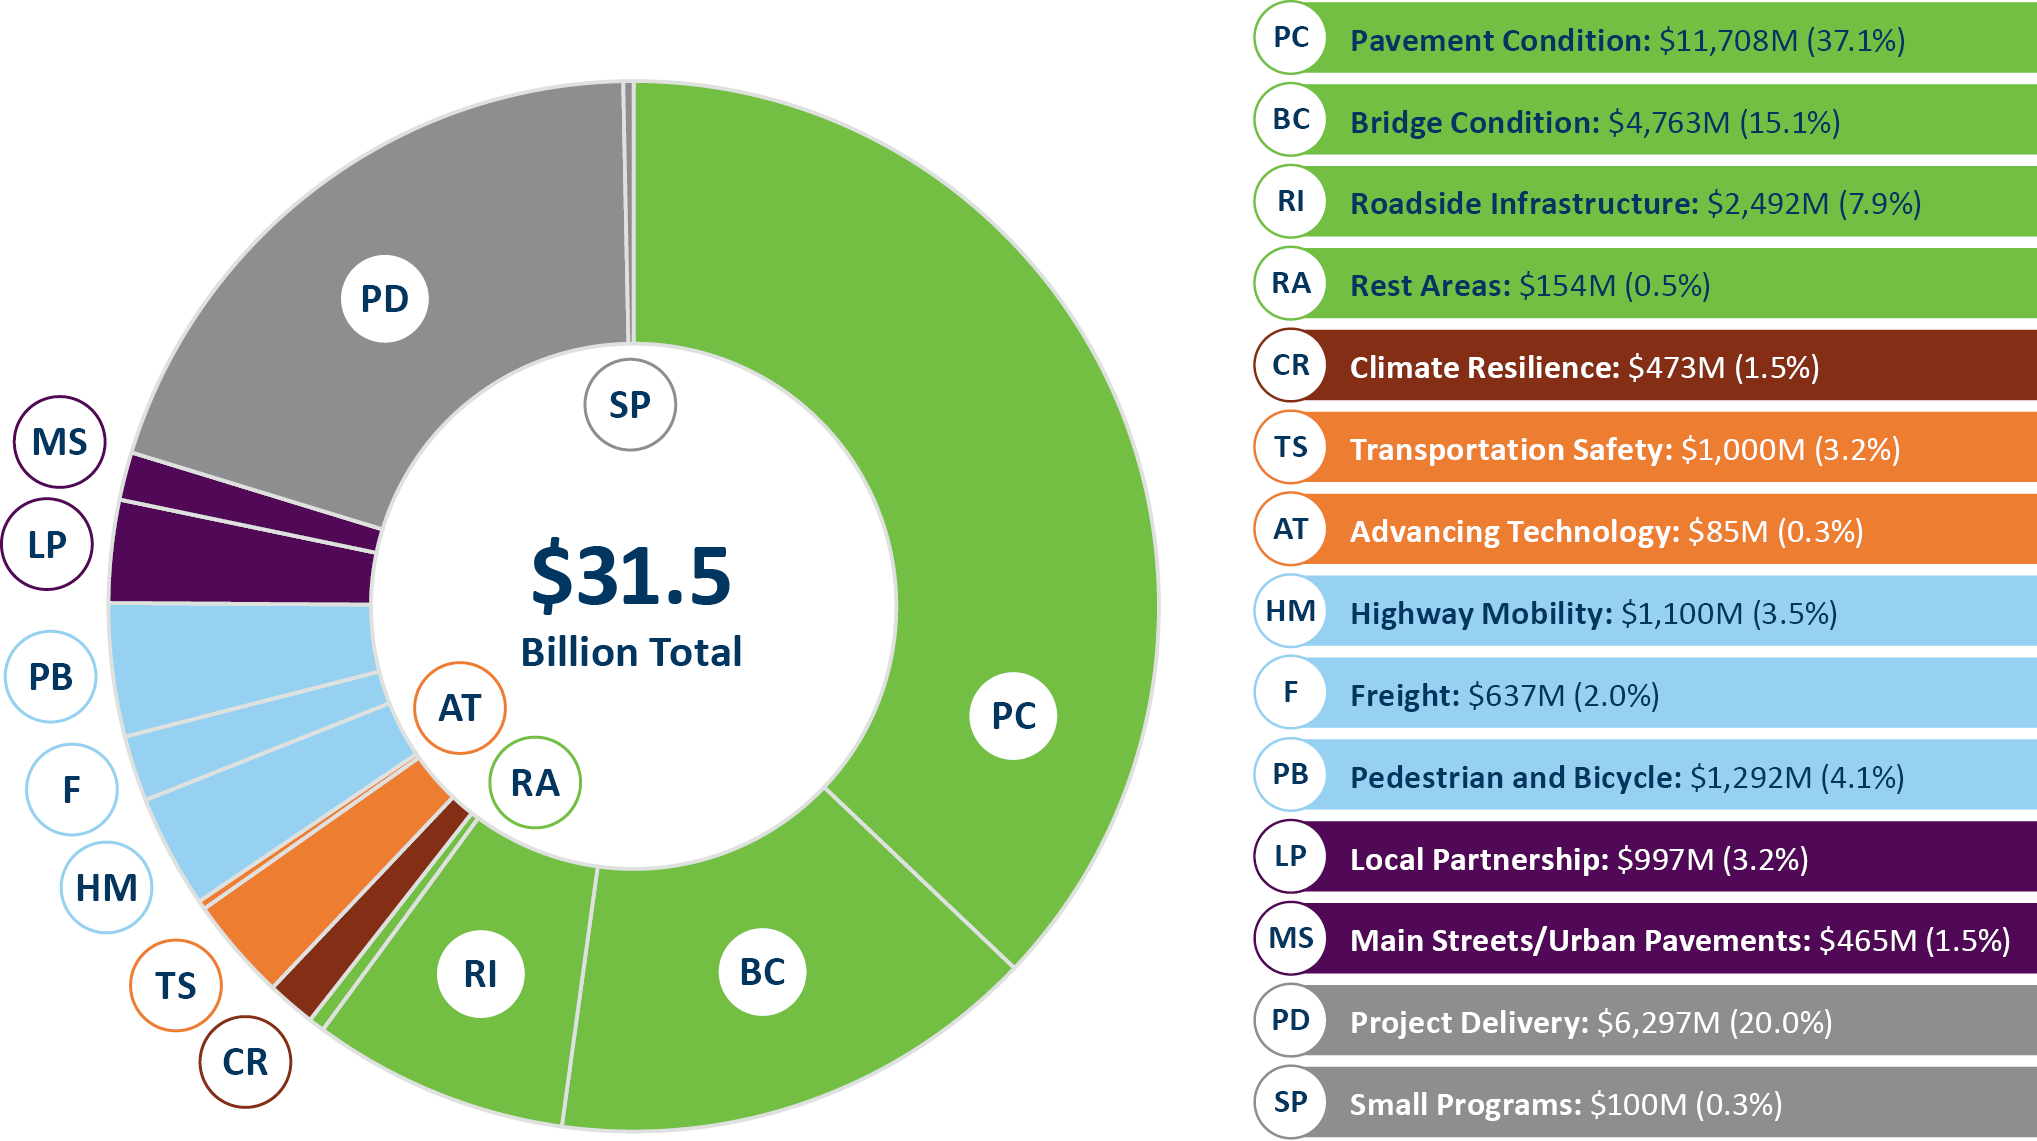 Pie chart showing draft investment direction by category. 61% of investment direction is going towards system stewardship with $11.7 billion in pavement condition, $4.8 billion in bridge condition, $2.5 billion in roadside infrastructure, and $154 million in rest areas. 1.5% of investment direction is going towards climate resilience with $473 million. 3.5% of the investment direction is going towards traveler safety with $1 billion in transportation safety and $85 million in advancing technology. 10% of investment direction is going towards critical connections with $1.1 billion in highway mobility, $637 million in freight, and $1.3 billion in pedestrian and bicycle. 5% of investment direction is going to towards healthy and equitable communities with $997 million in local partnerships and $465 million in main streets/urban pavements. 20% of investment direction is going towards other areas with $6.3 billion in project delivery and $100 million in small programs.